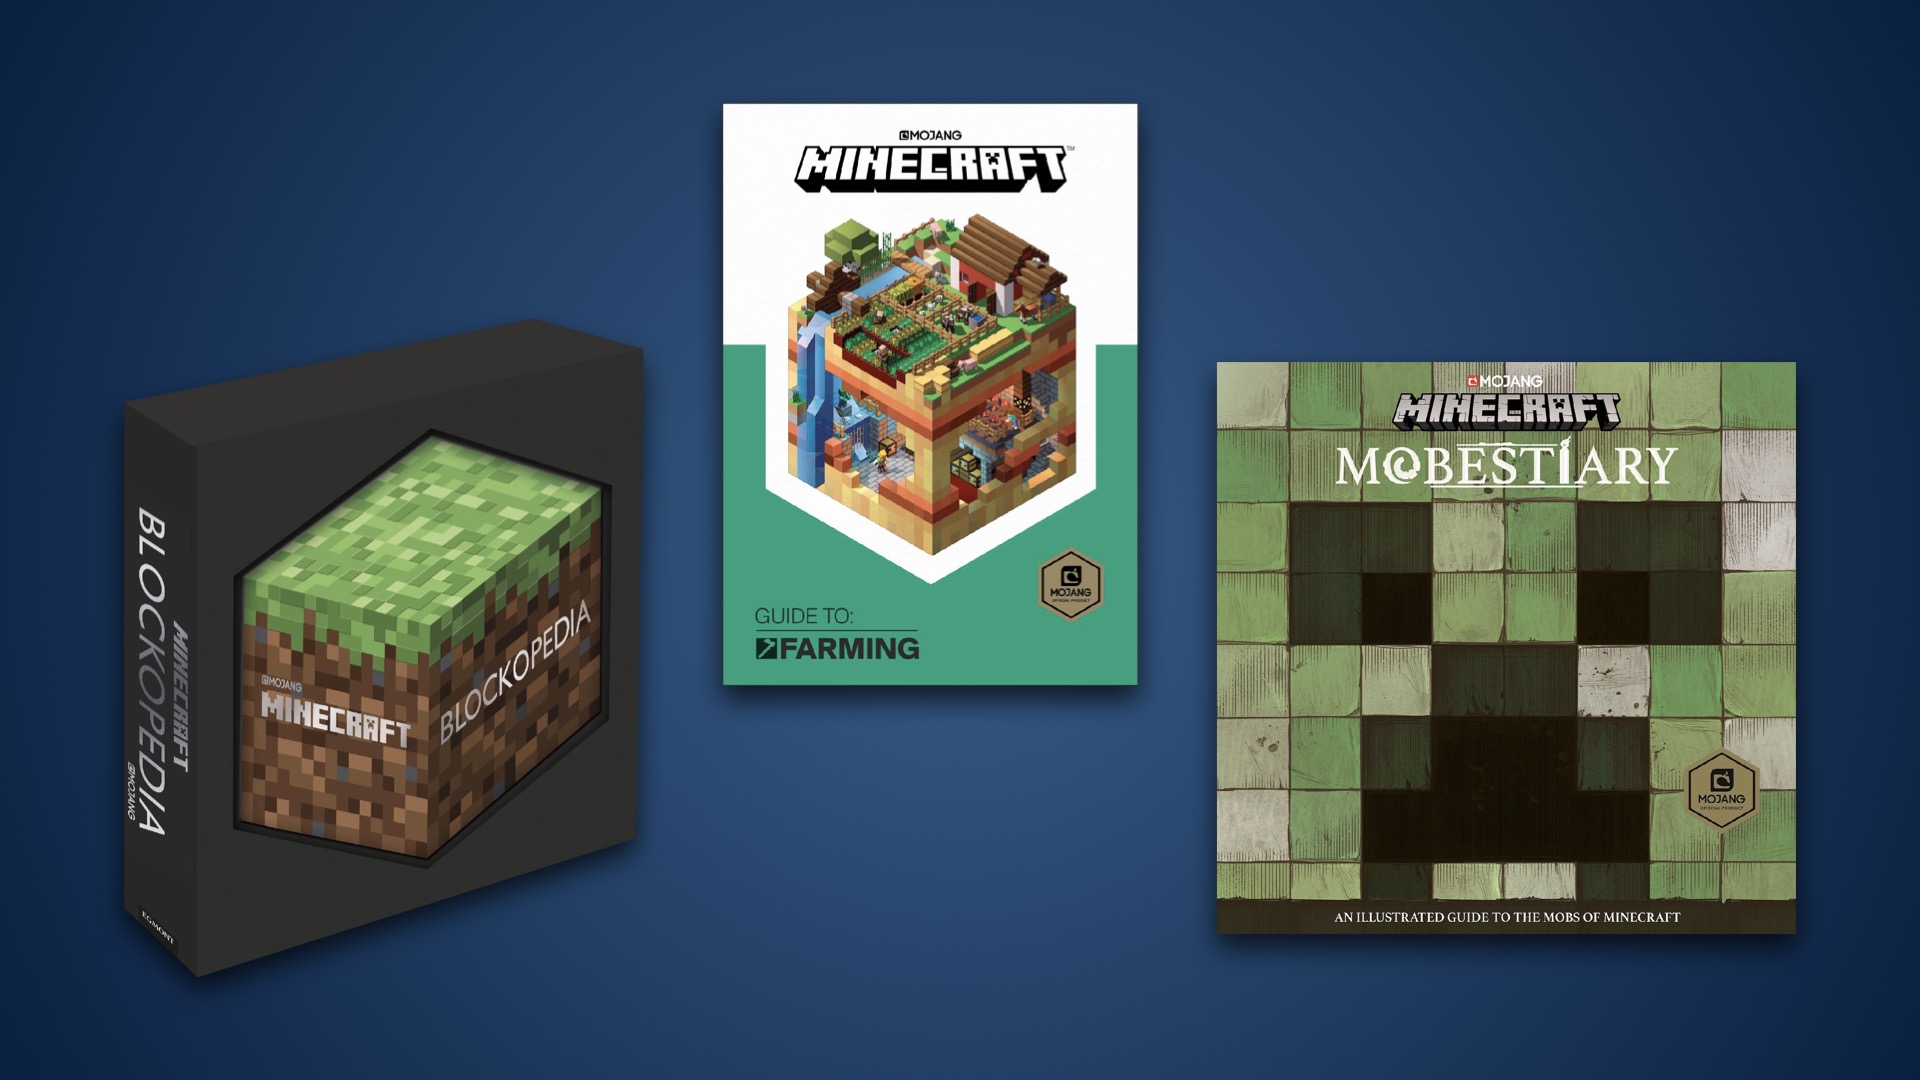 Pictures of covers of three books about Minecraft: Blockopedia, Guide to Farming and Mobestiary